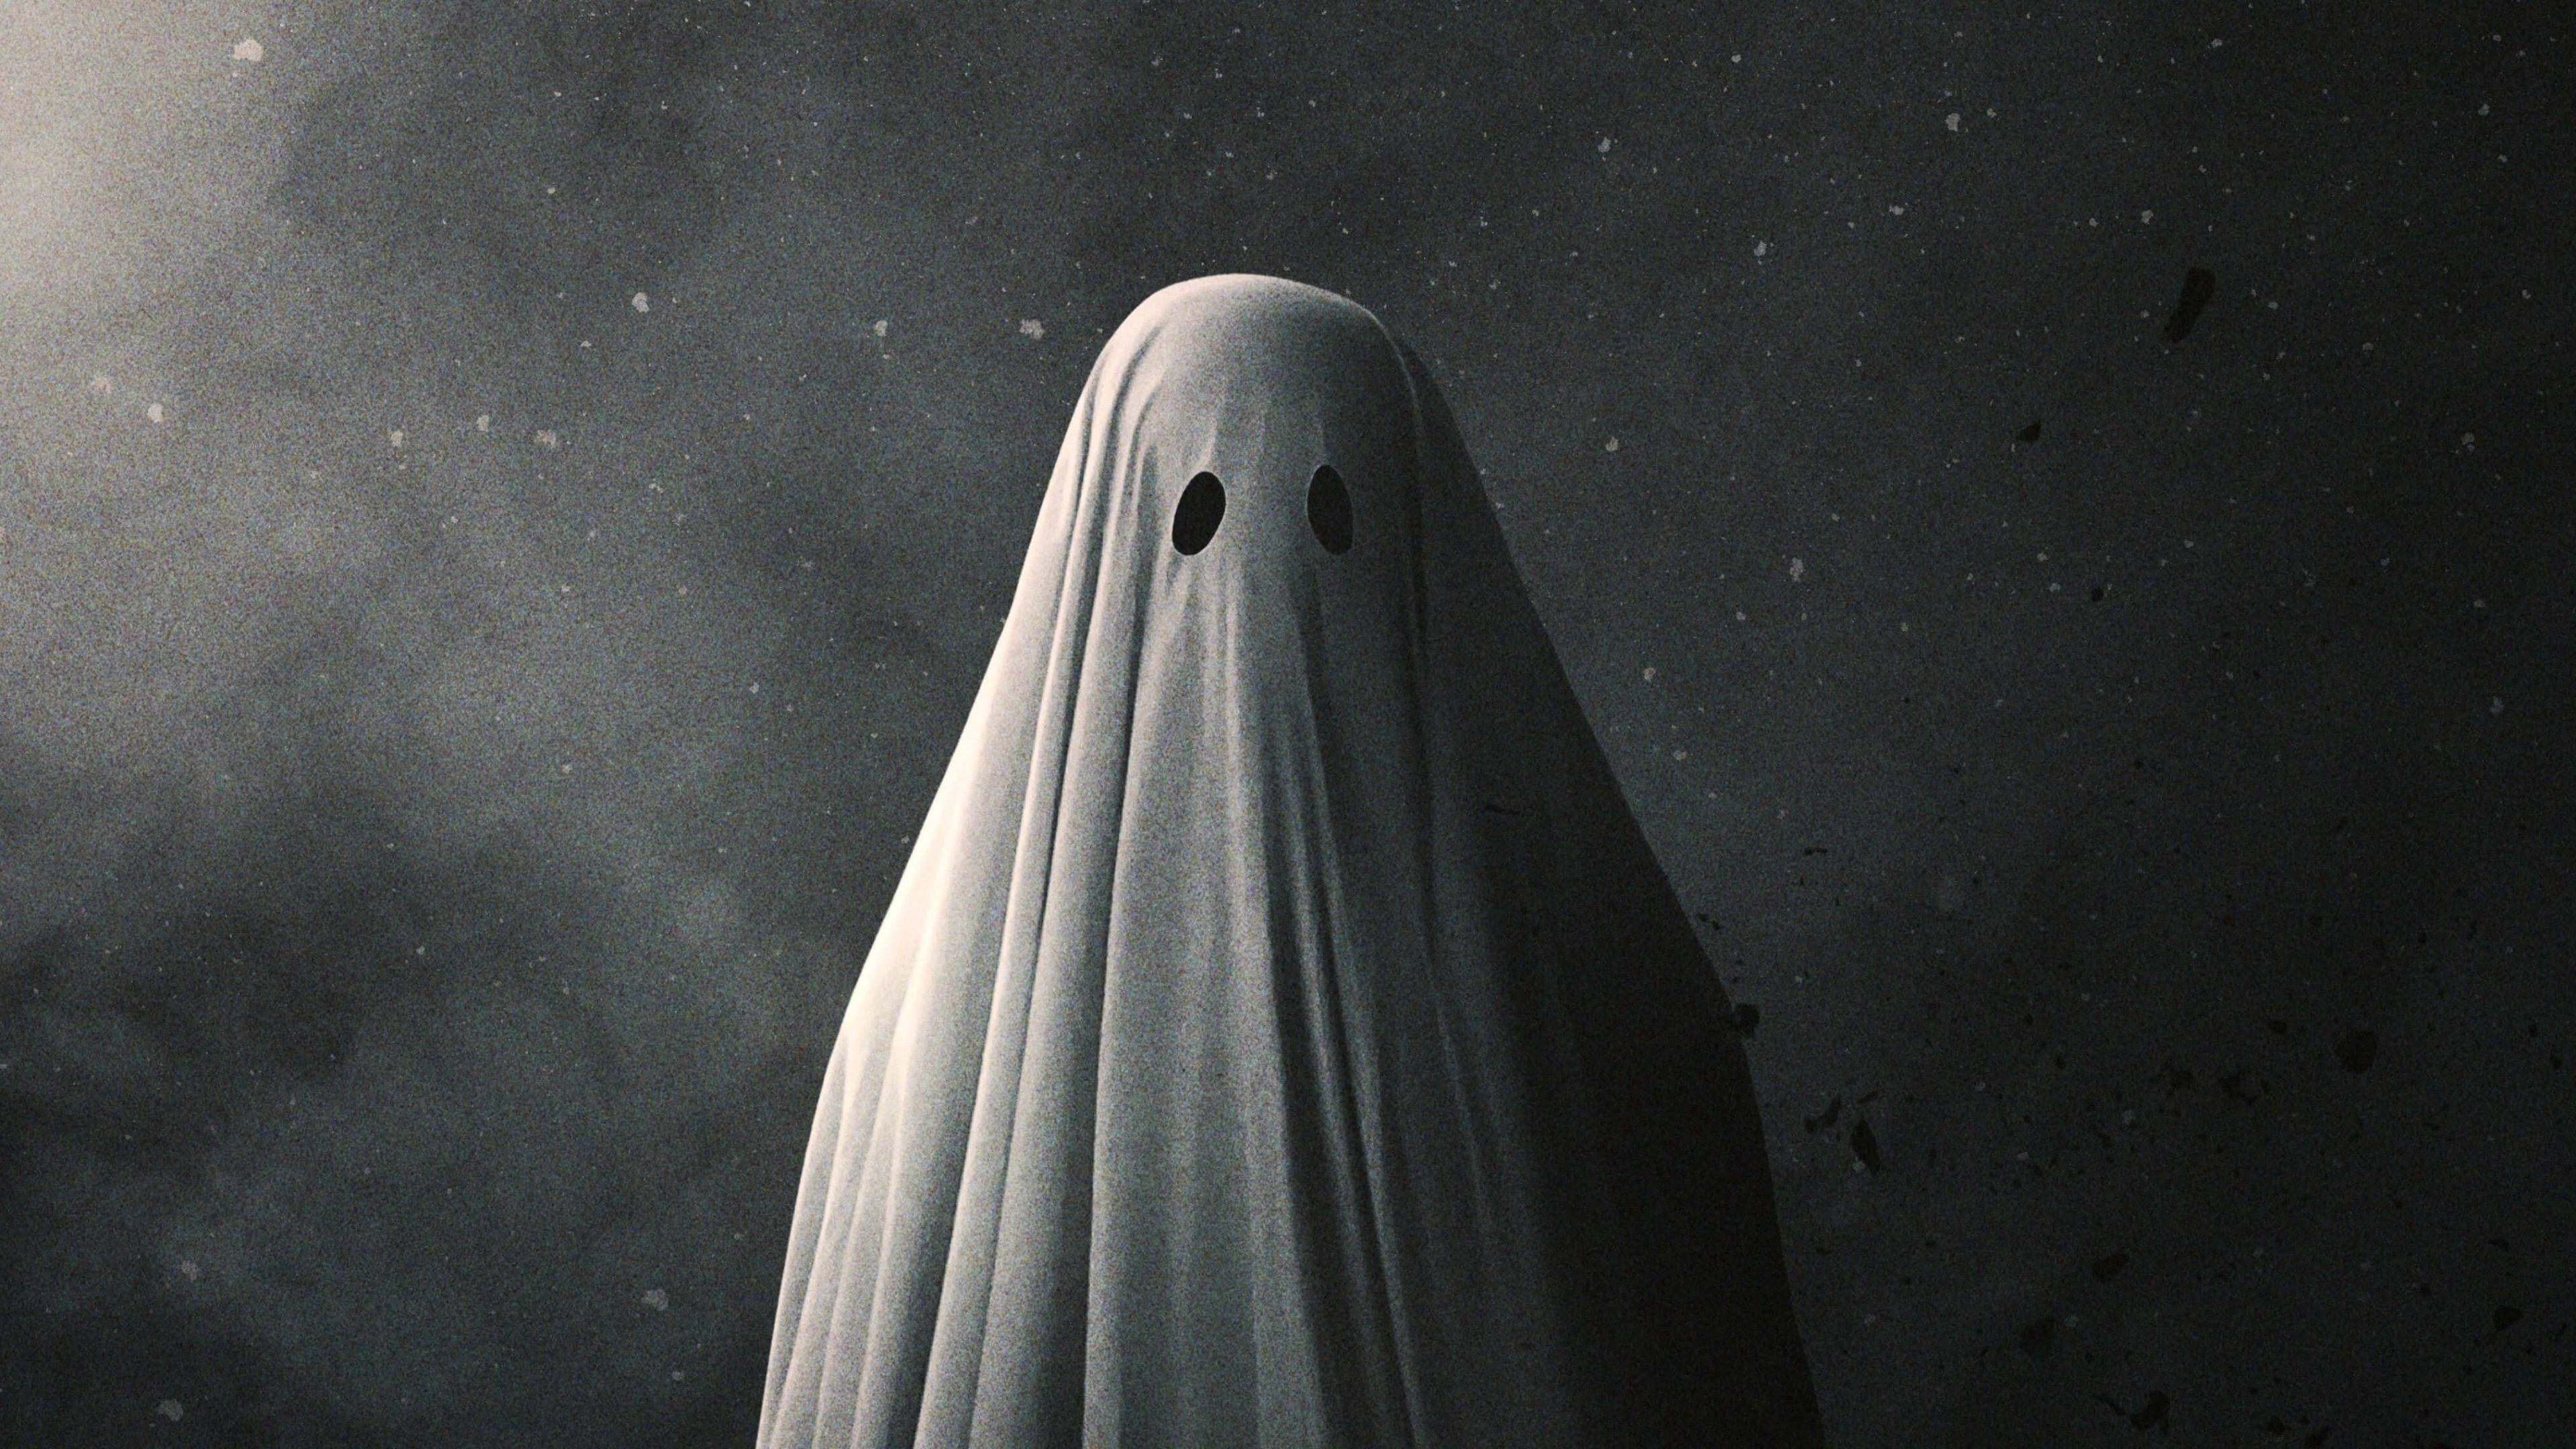 ghost hd photo download